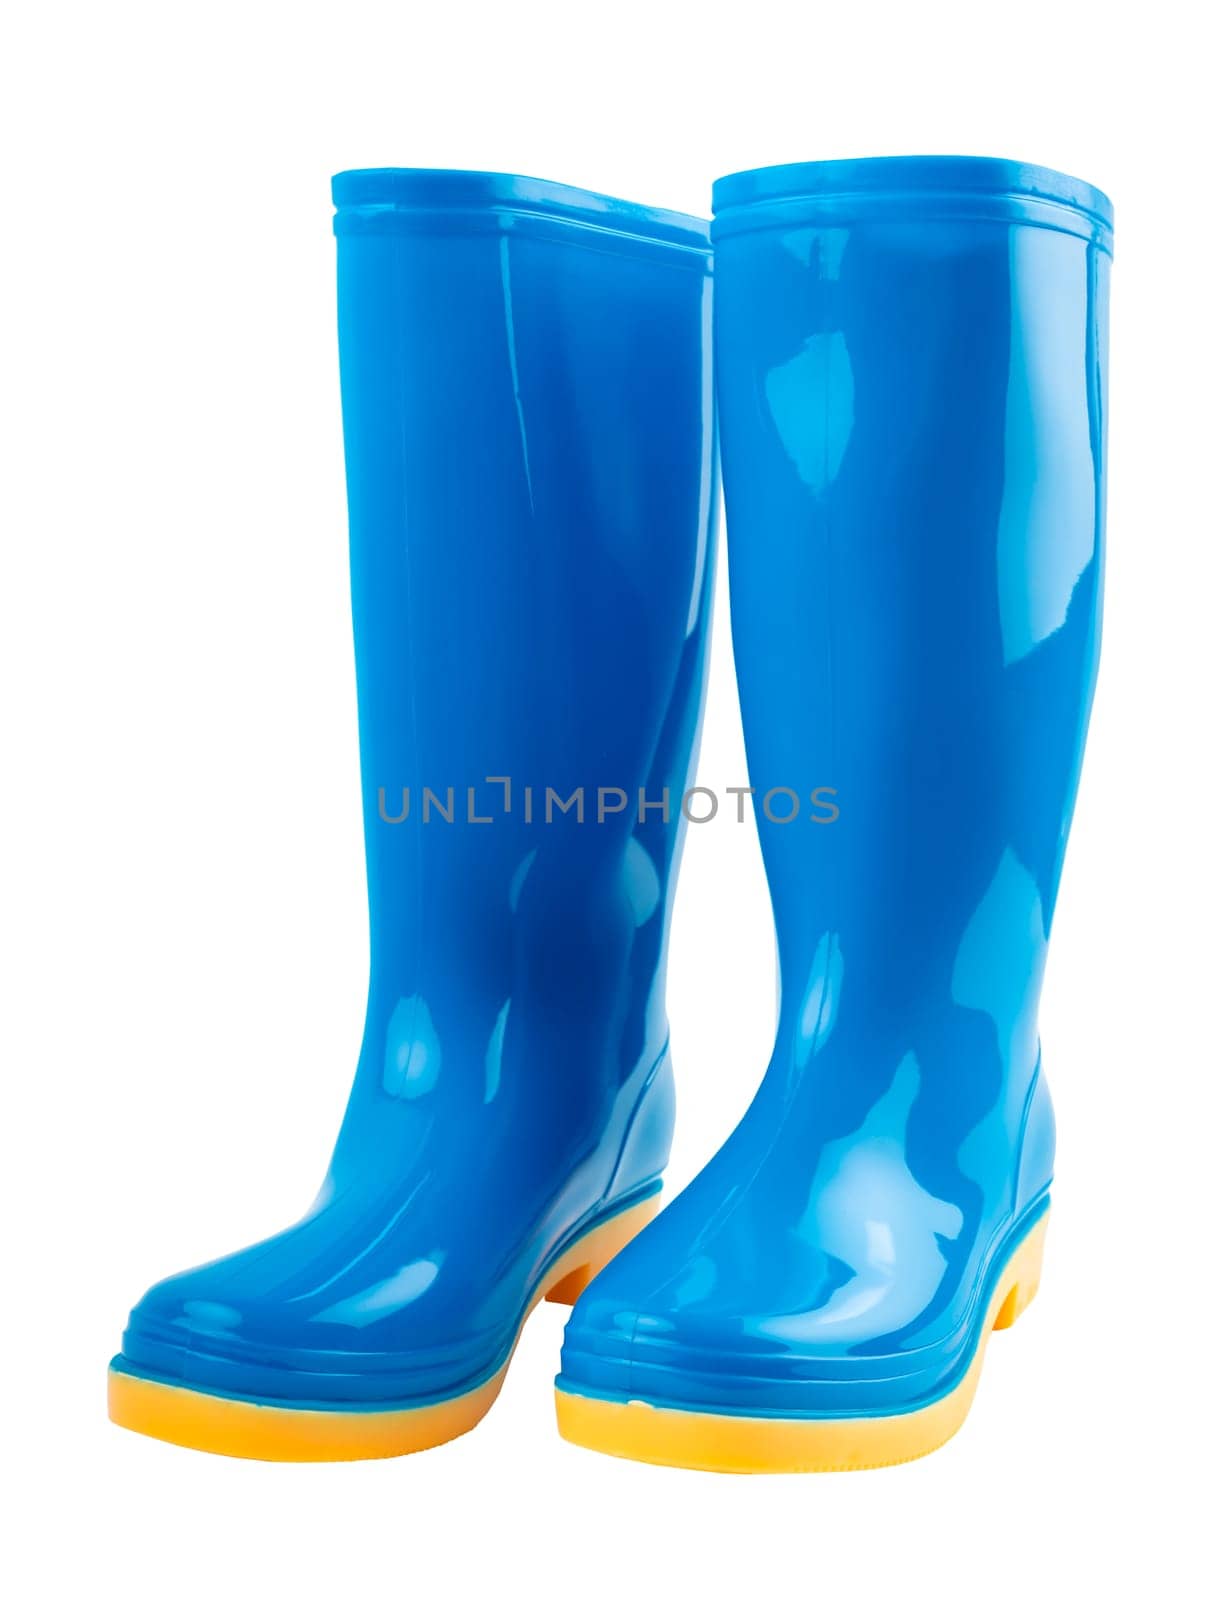 Pair of blue and yellow rubber boots isolated on white background. by Gamjai